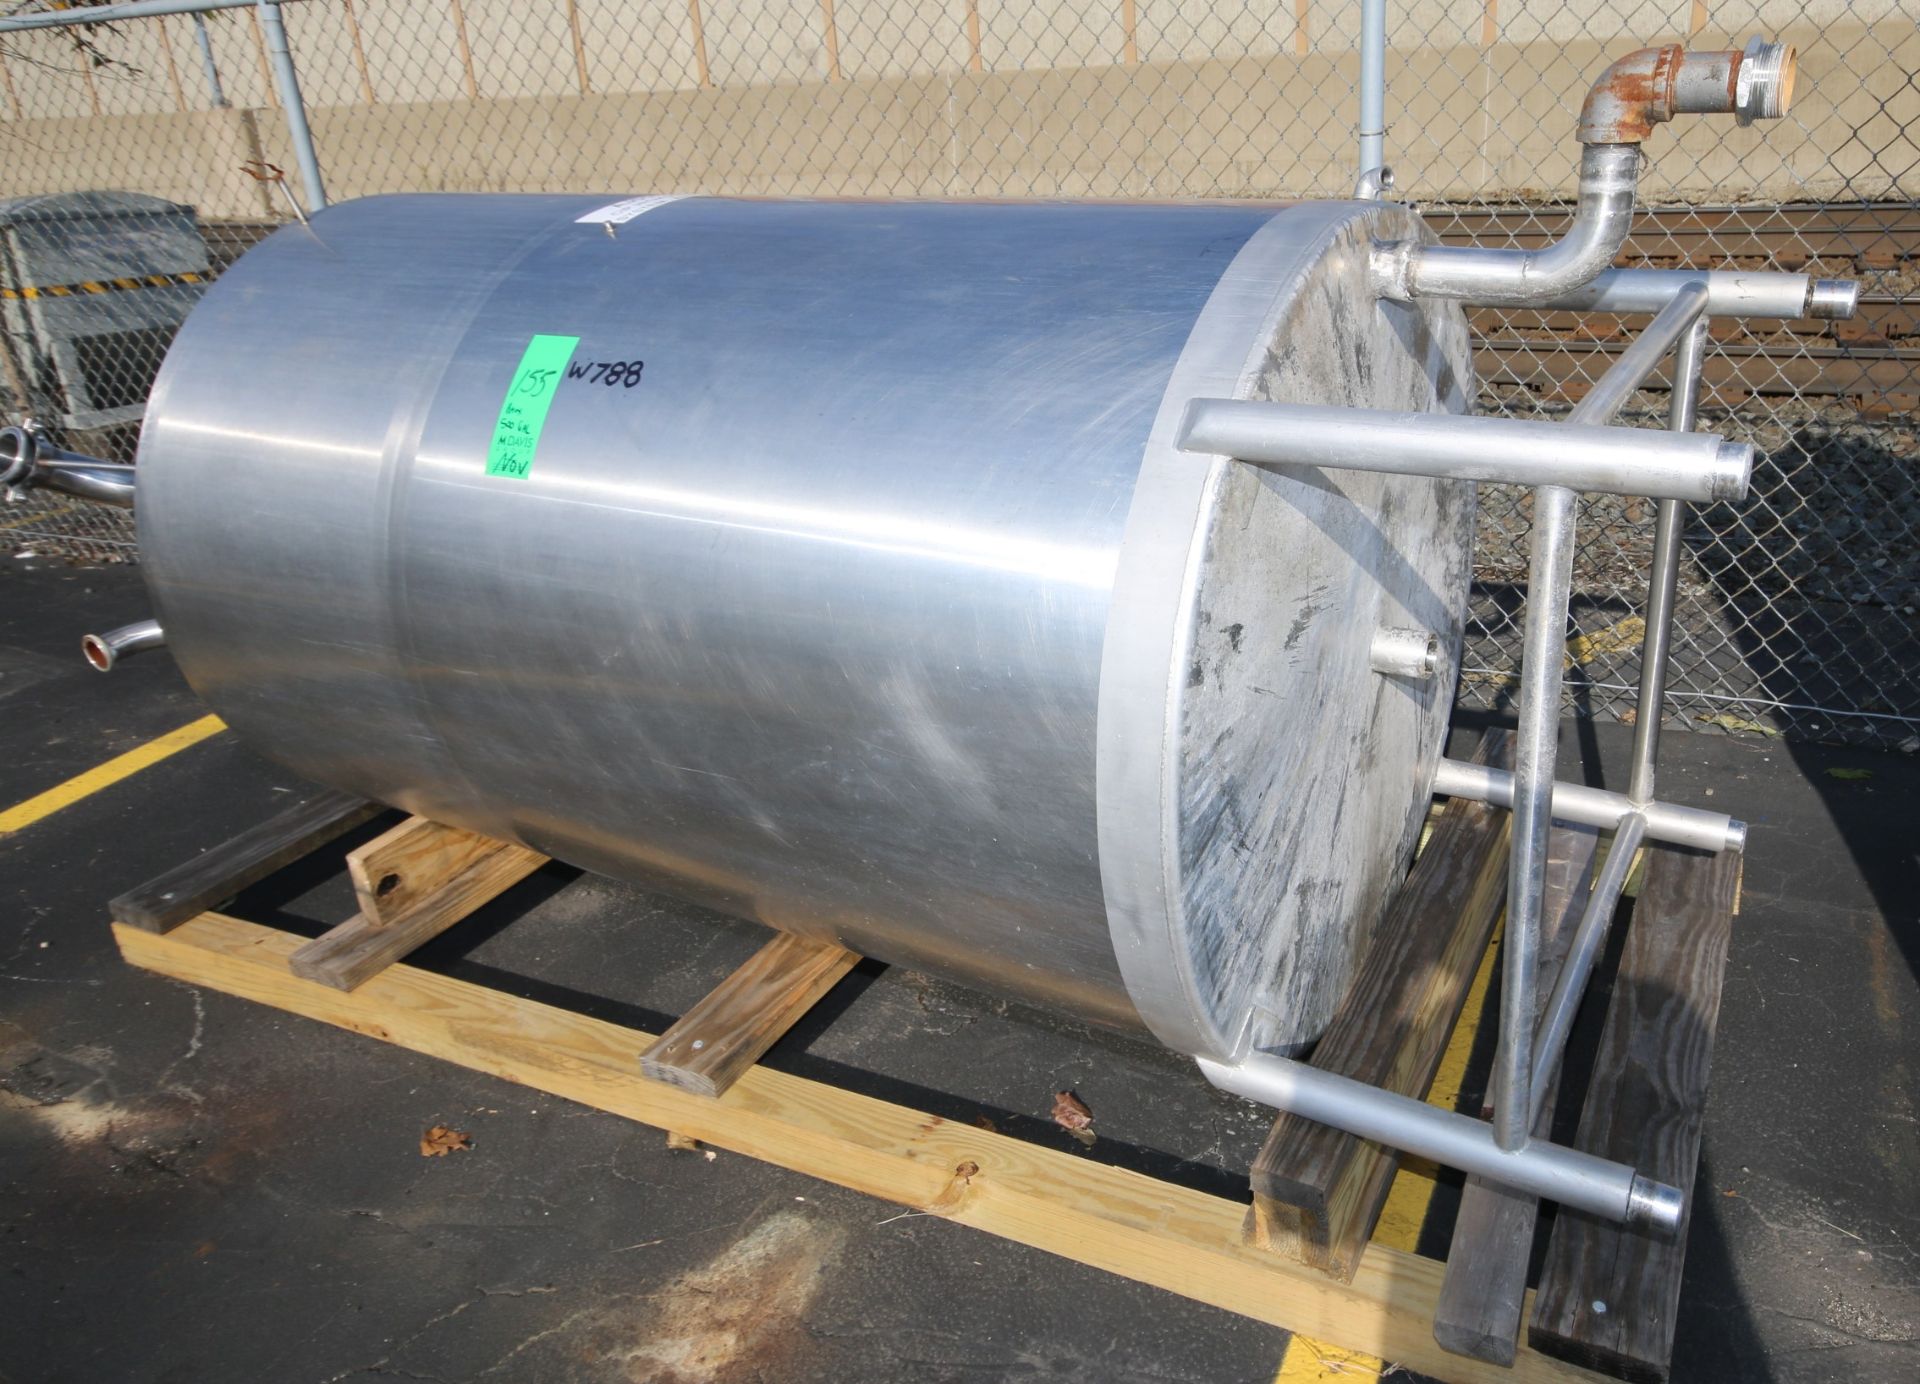 Approx 500 Gallon, verticle S/S CIP Tank, with Top Access Door, Mounted on S/S Legs, Overall